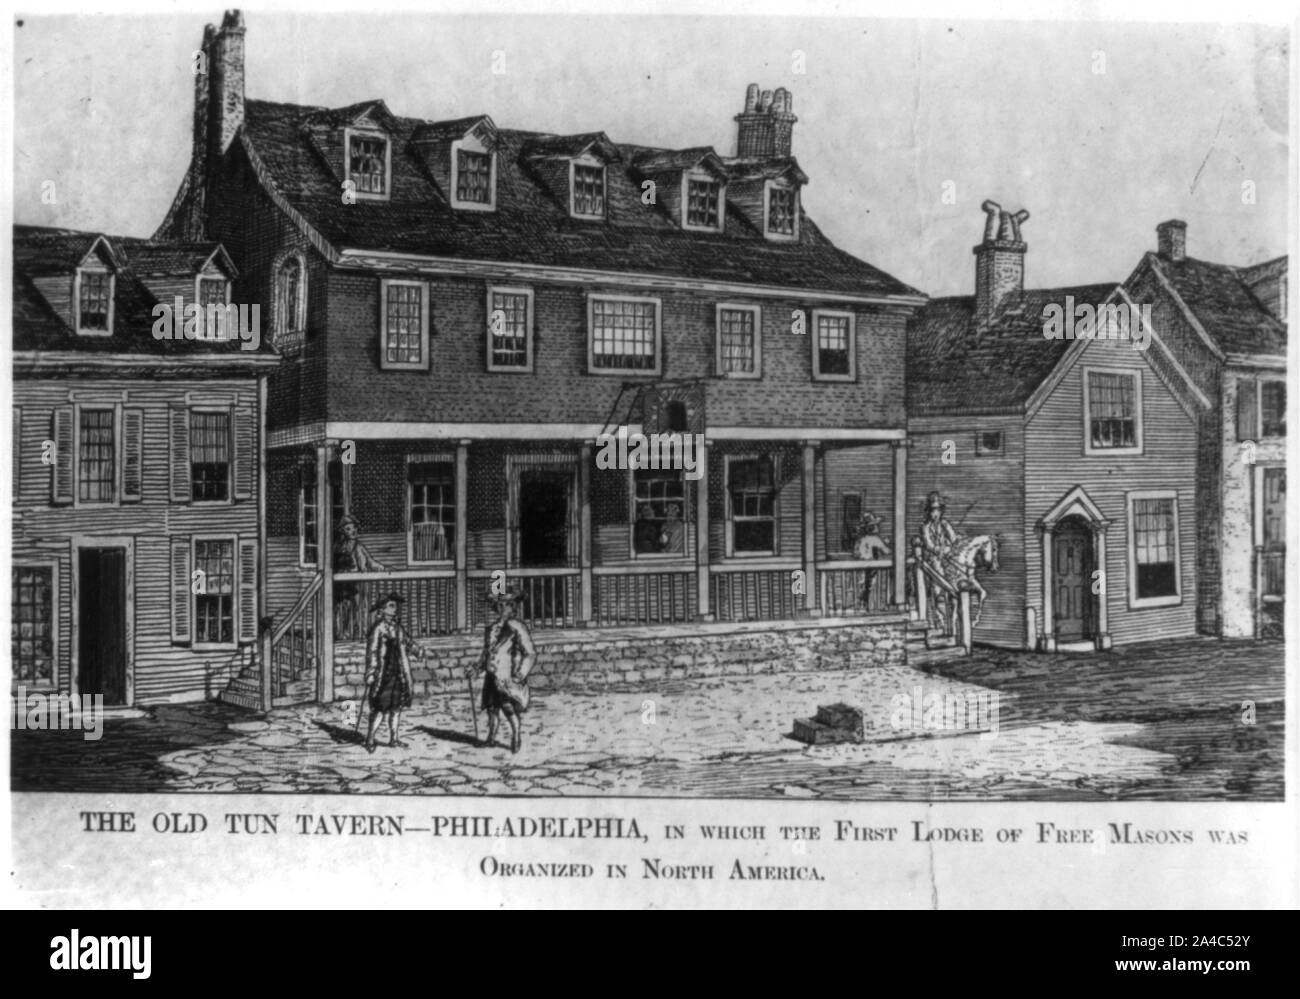 The Old Tun Tavern, Philadelphia, in which the first lodge of Free Masons was organized in North America Stock Photo